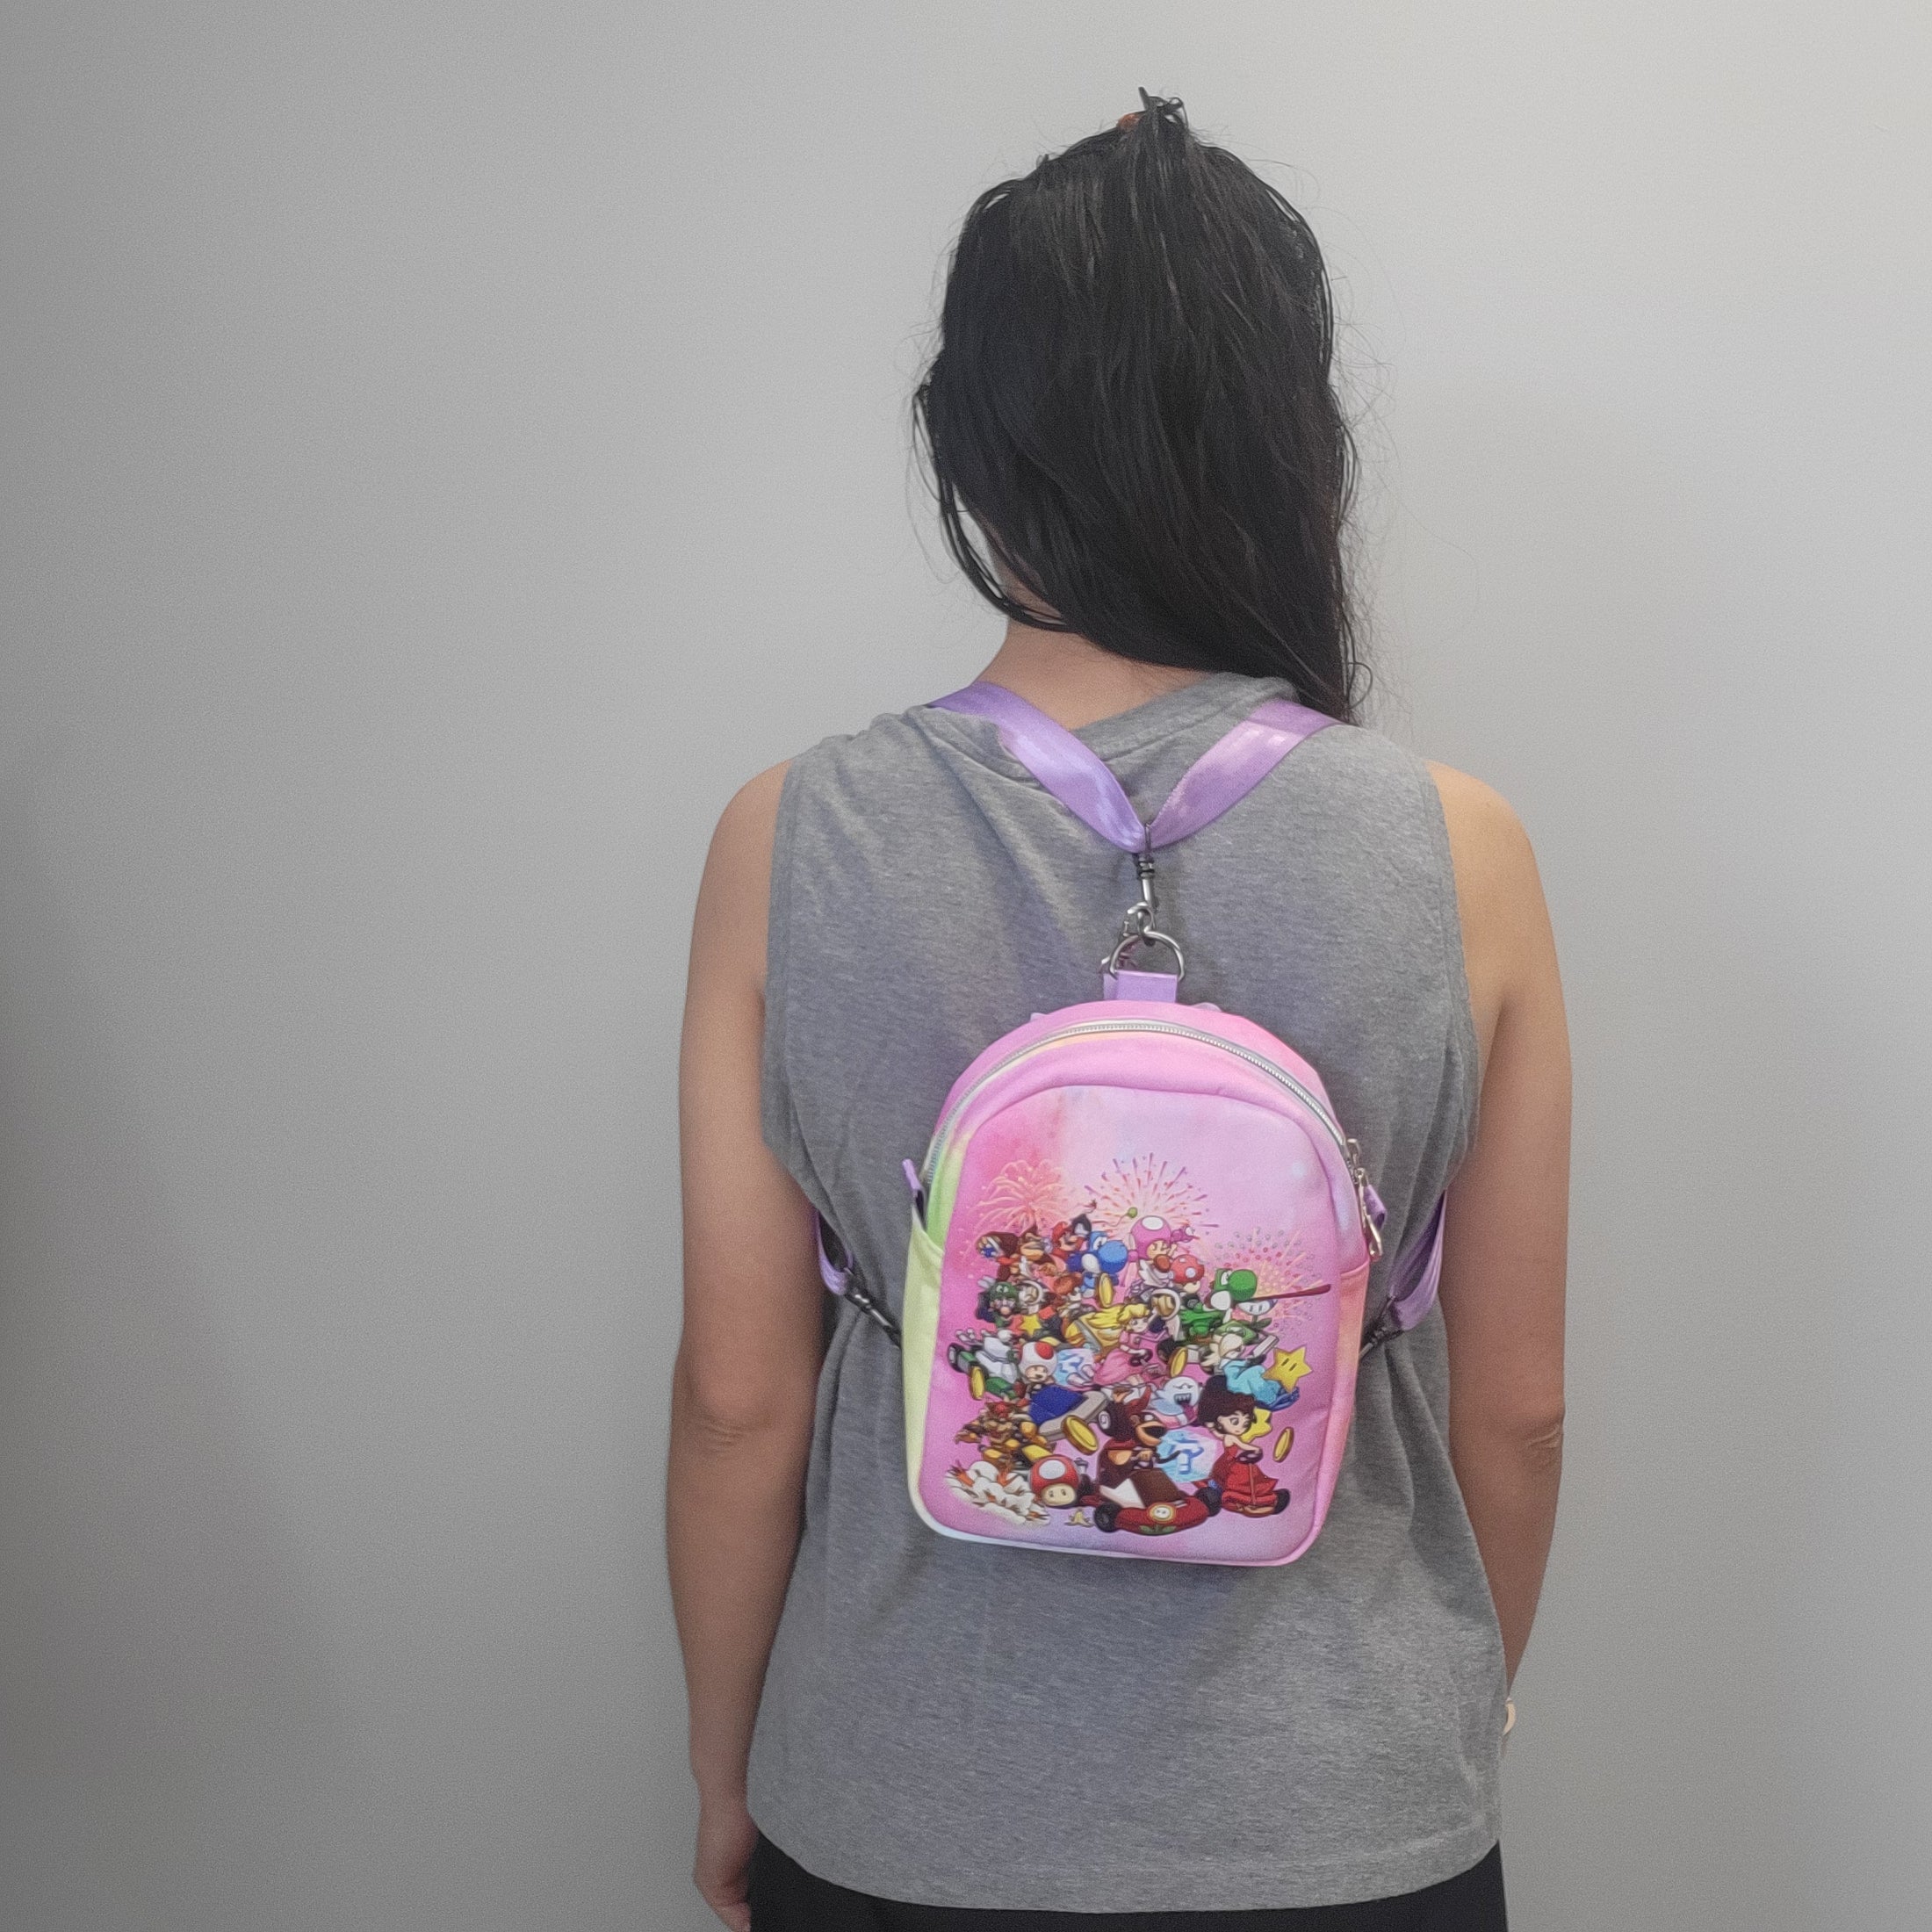 Person wearing the Mario Kart inspired bag as a backpack.